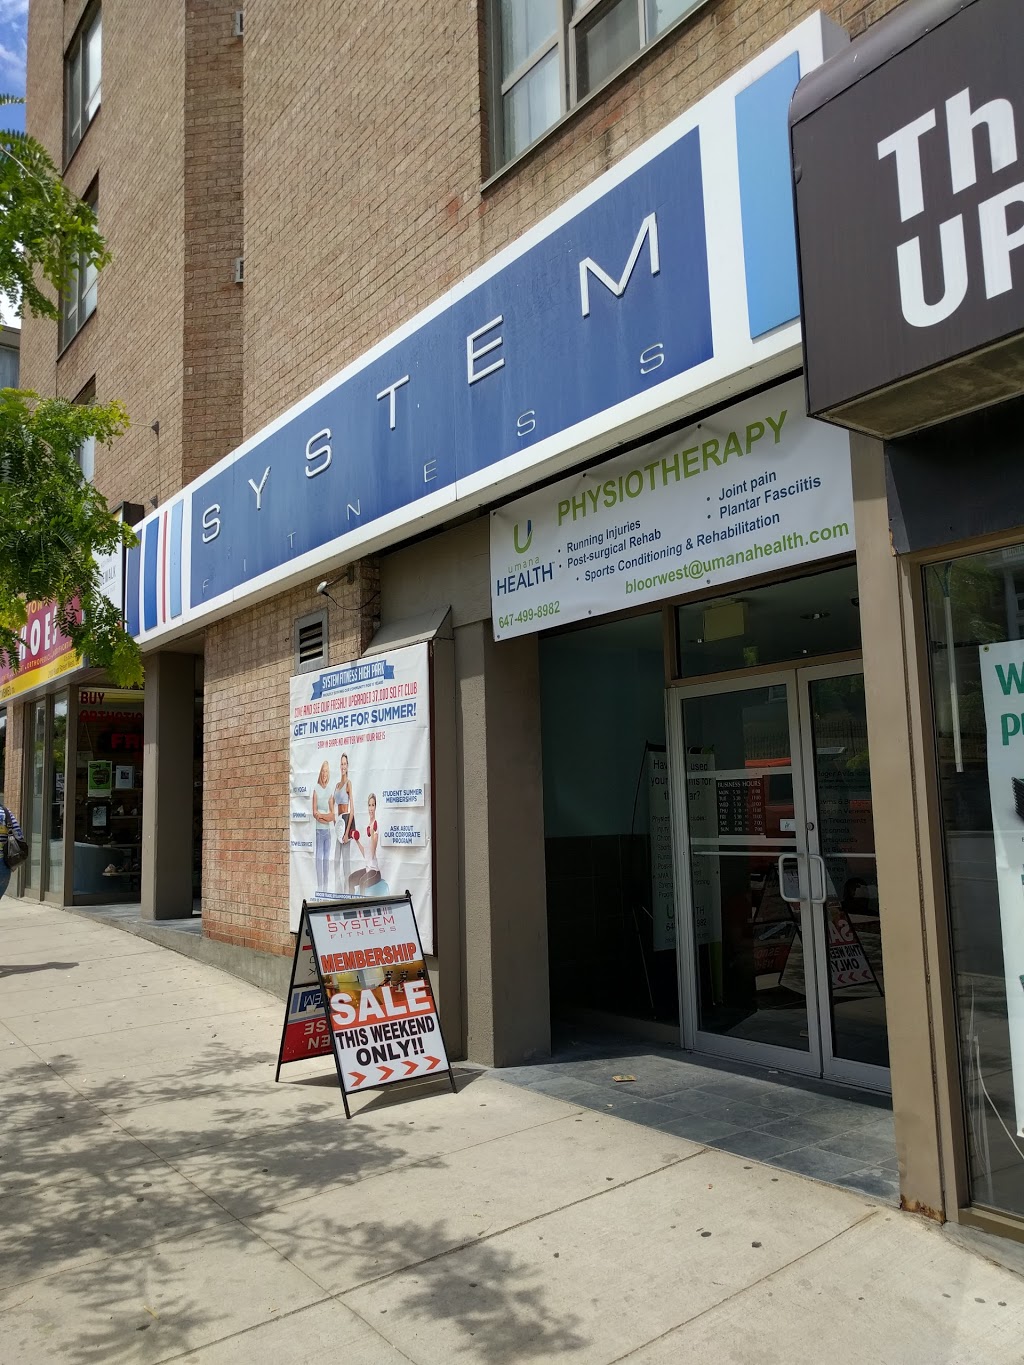 System Fitness High Park | 2100 Bloor St W, Toronto, ON M6S 1M7, Canada | Phone: (416) 762-6262